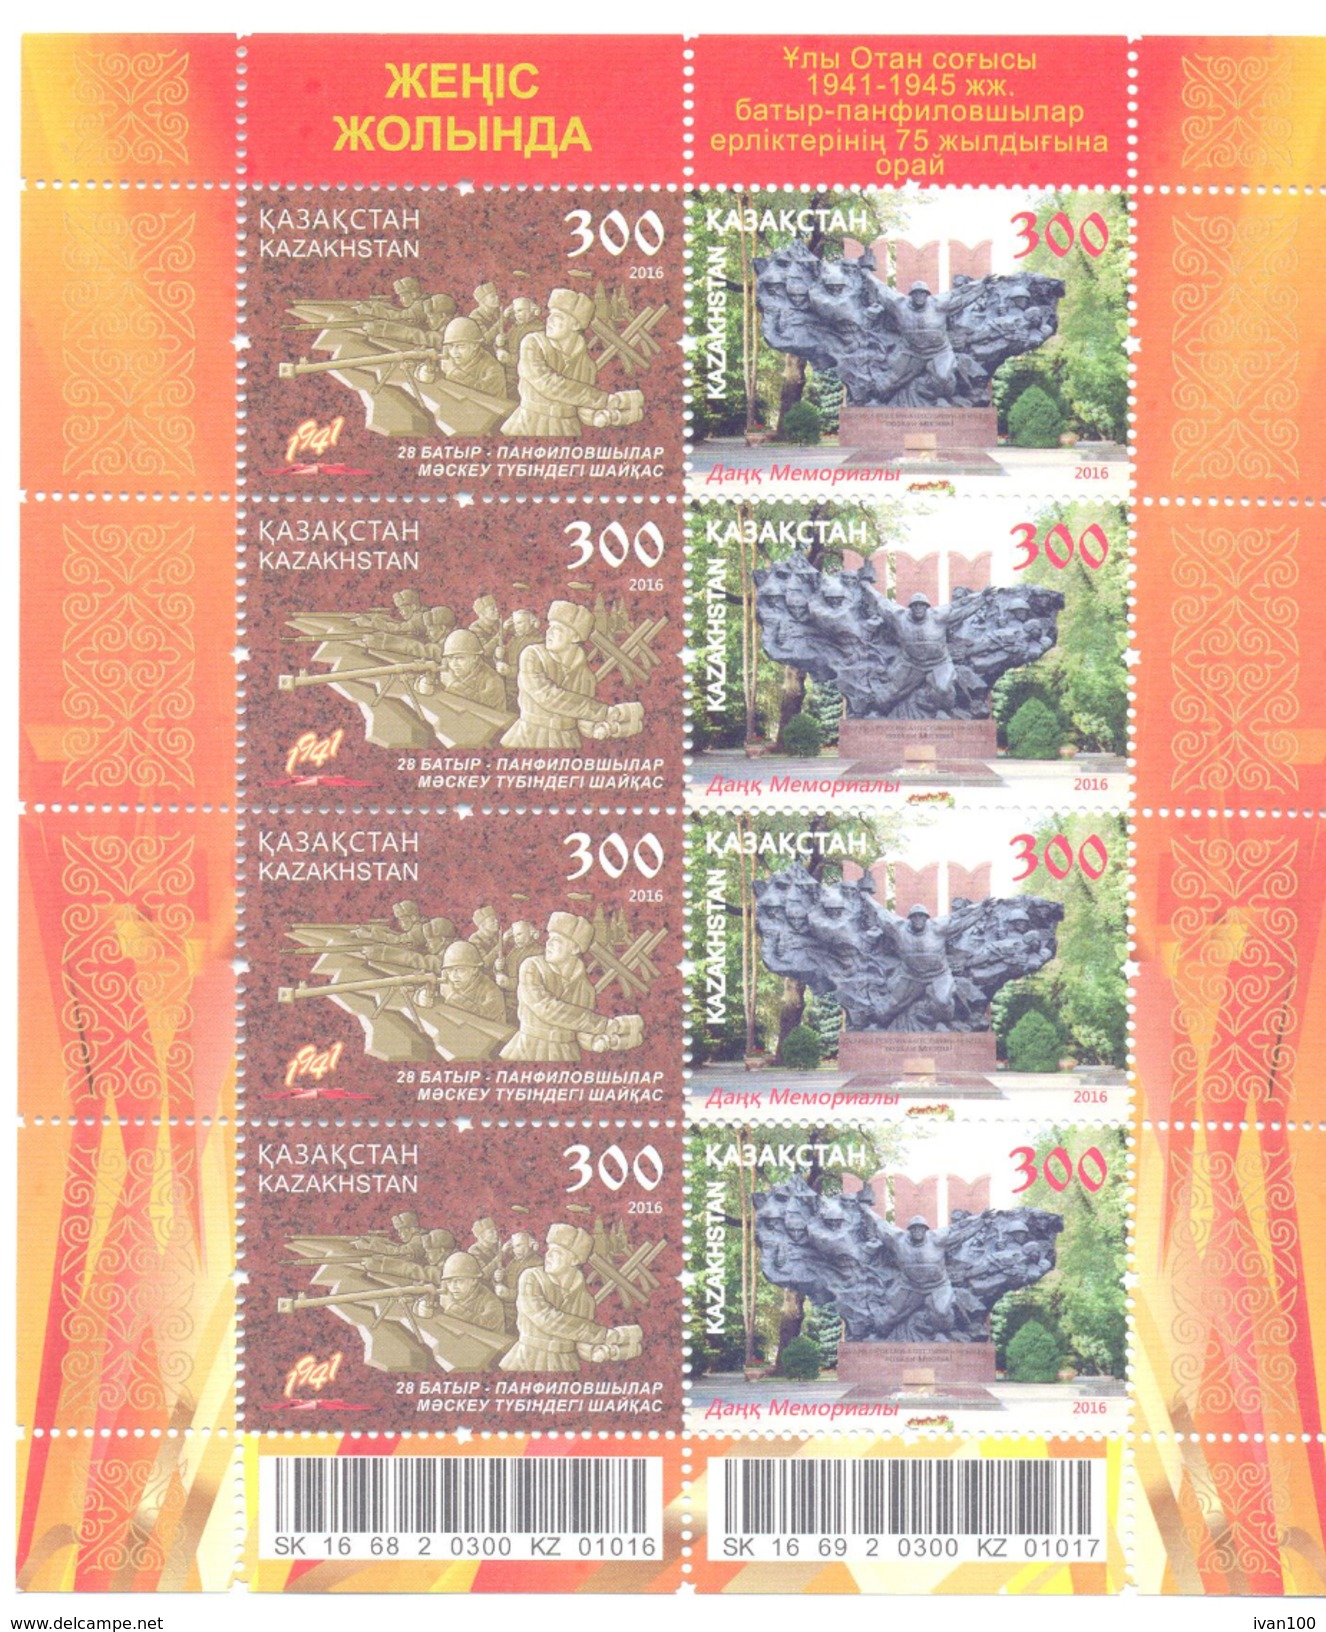 2016. Kazakhstan, 75y Of Feat Panfilov Heroes, Joint Issue With Russia, Sheetlet,  Mint/** - Kazachstan